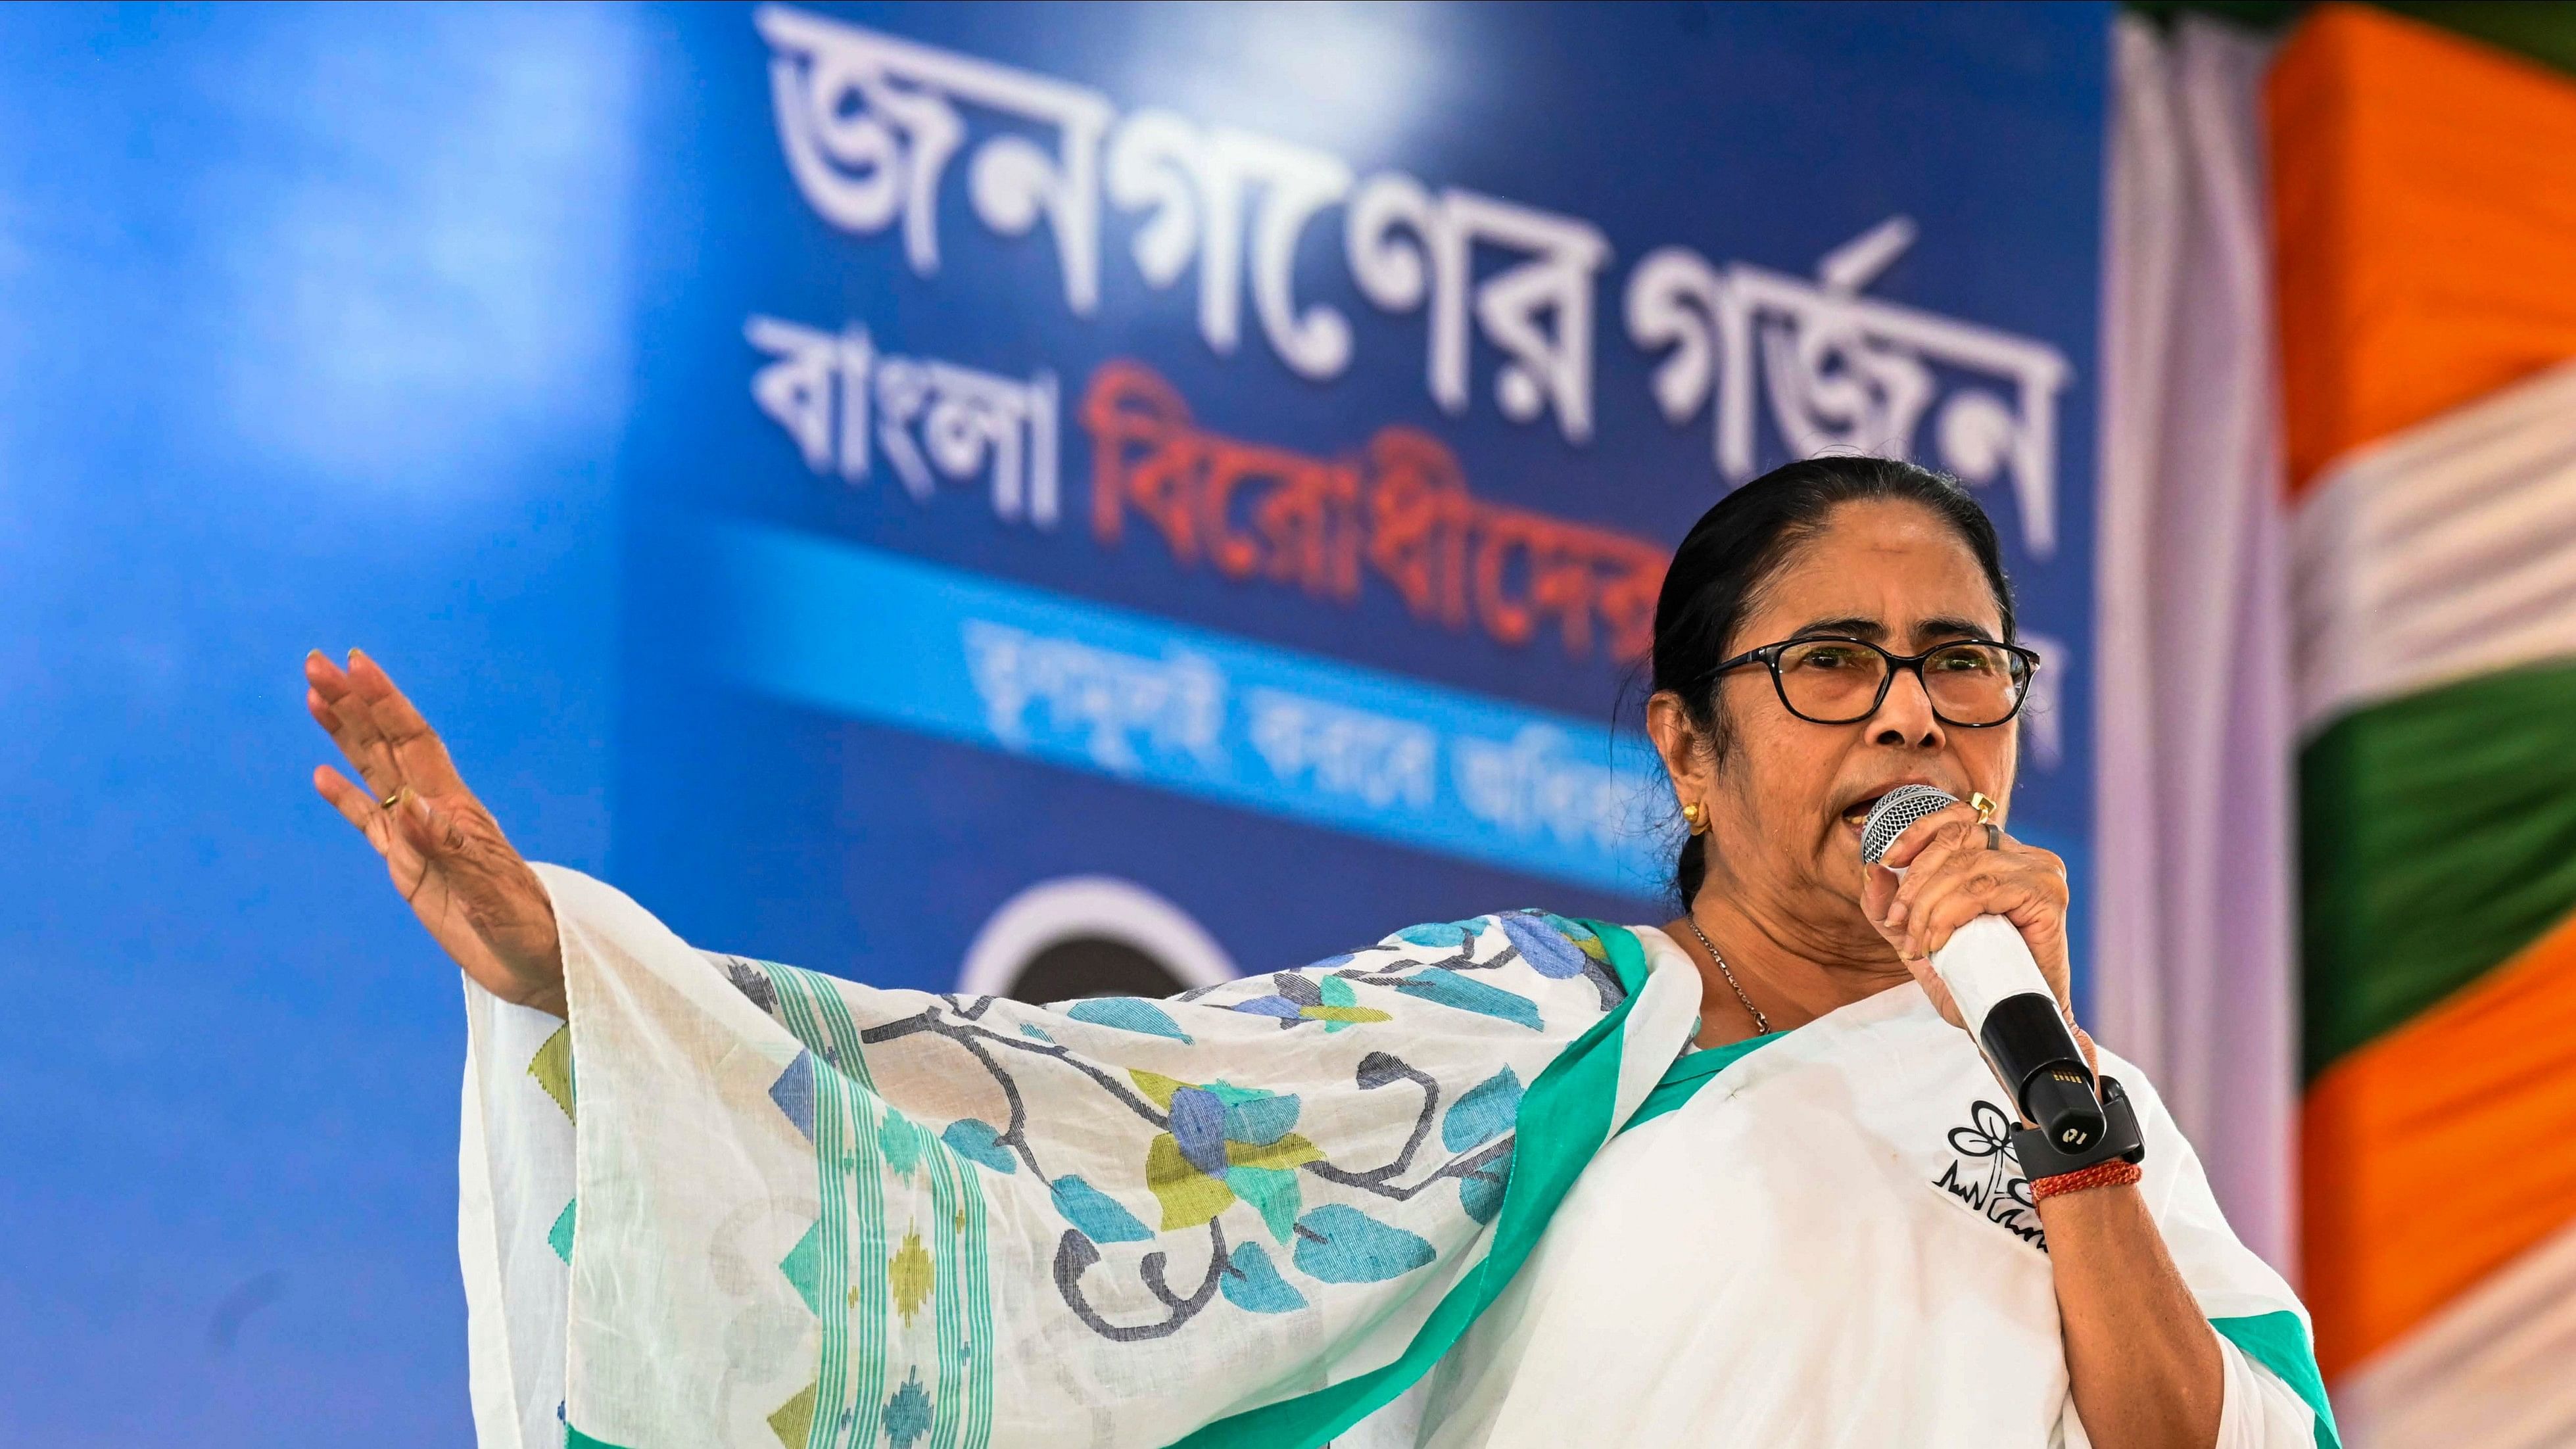 <div class="paragraphs"><p> West Bengal Chief Minister and TMC chief Mamata Banerjee addresses a public meeting in support of party candidate Dev at Ghatal.</p></div>